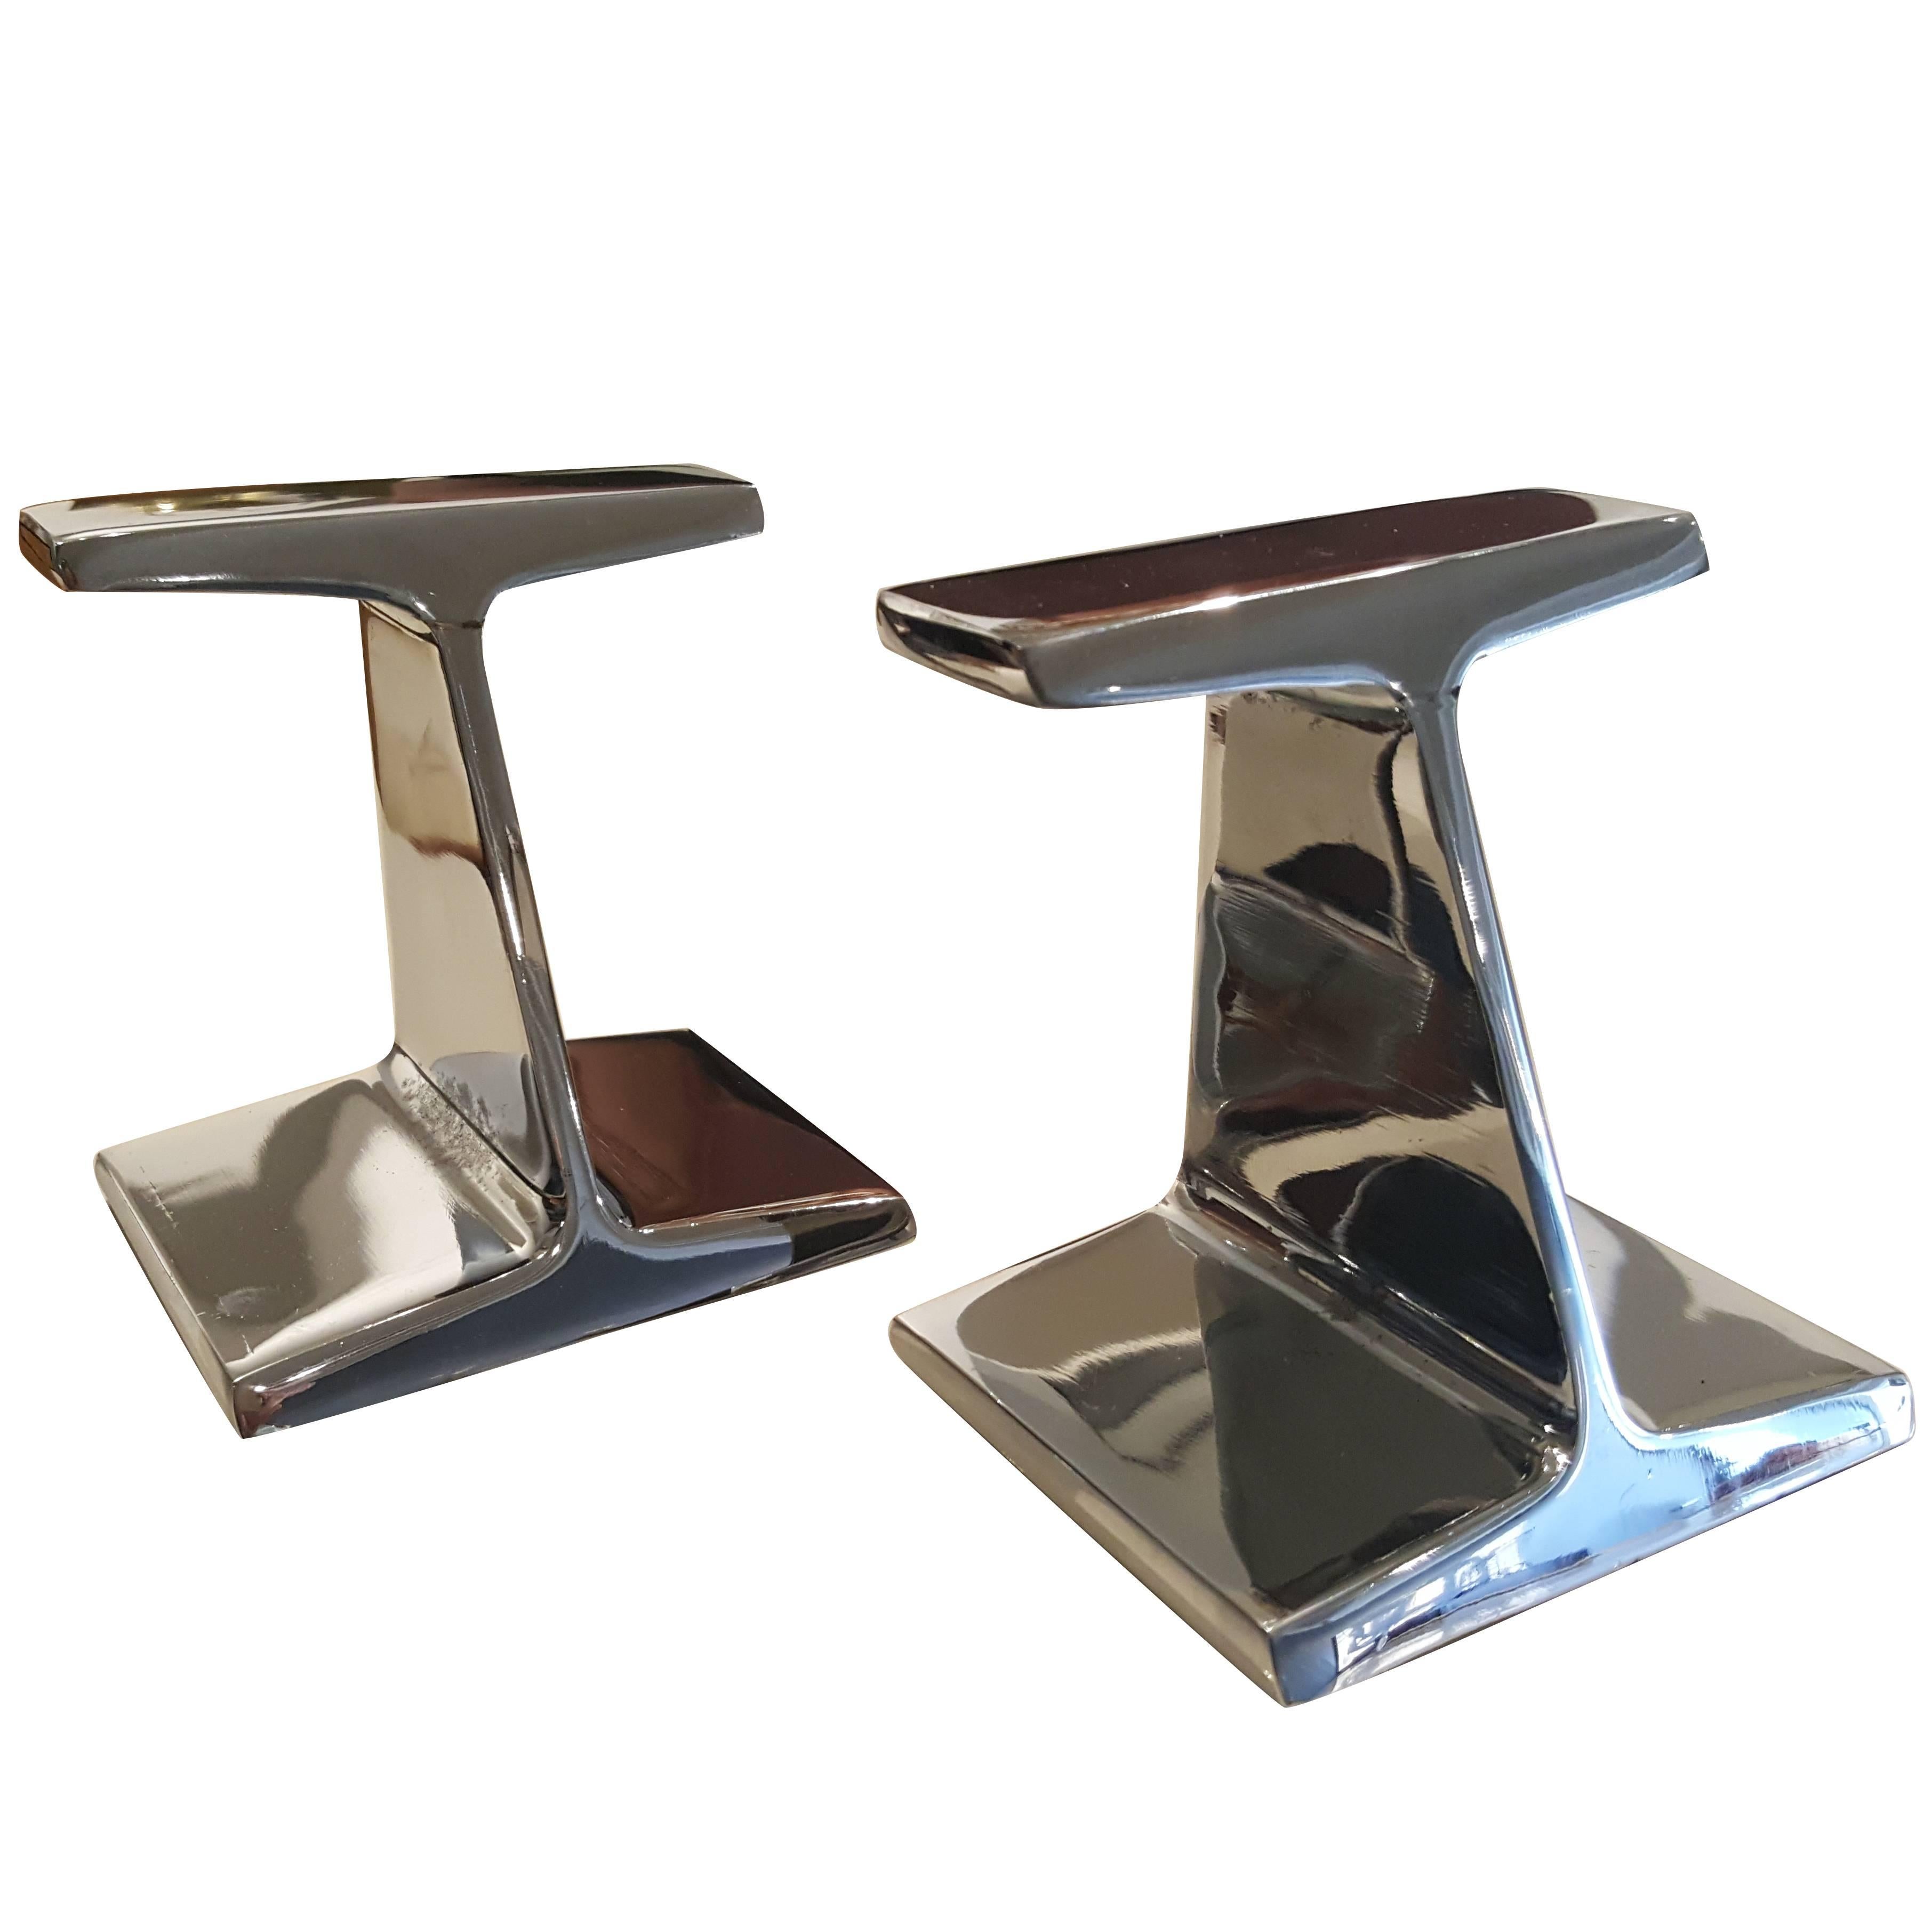 Stunning Chrome-Plated Steel Railroad Tie Bookends, 1970s